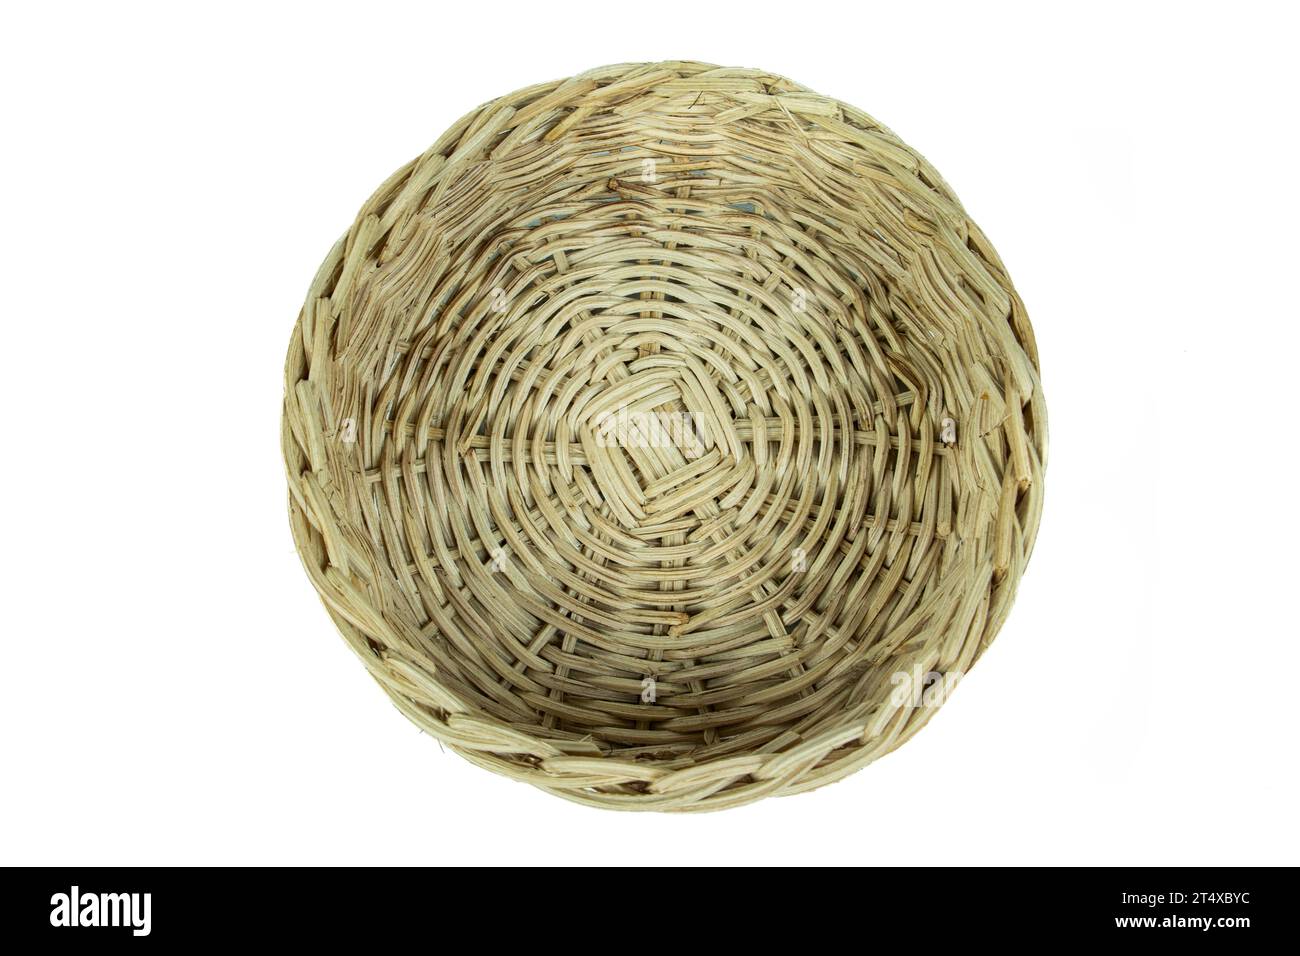 Top View wicker basket on white background Stock Photo